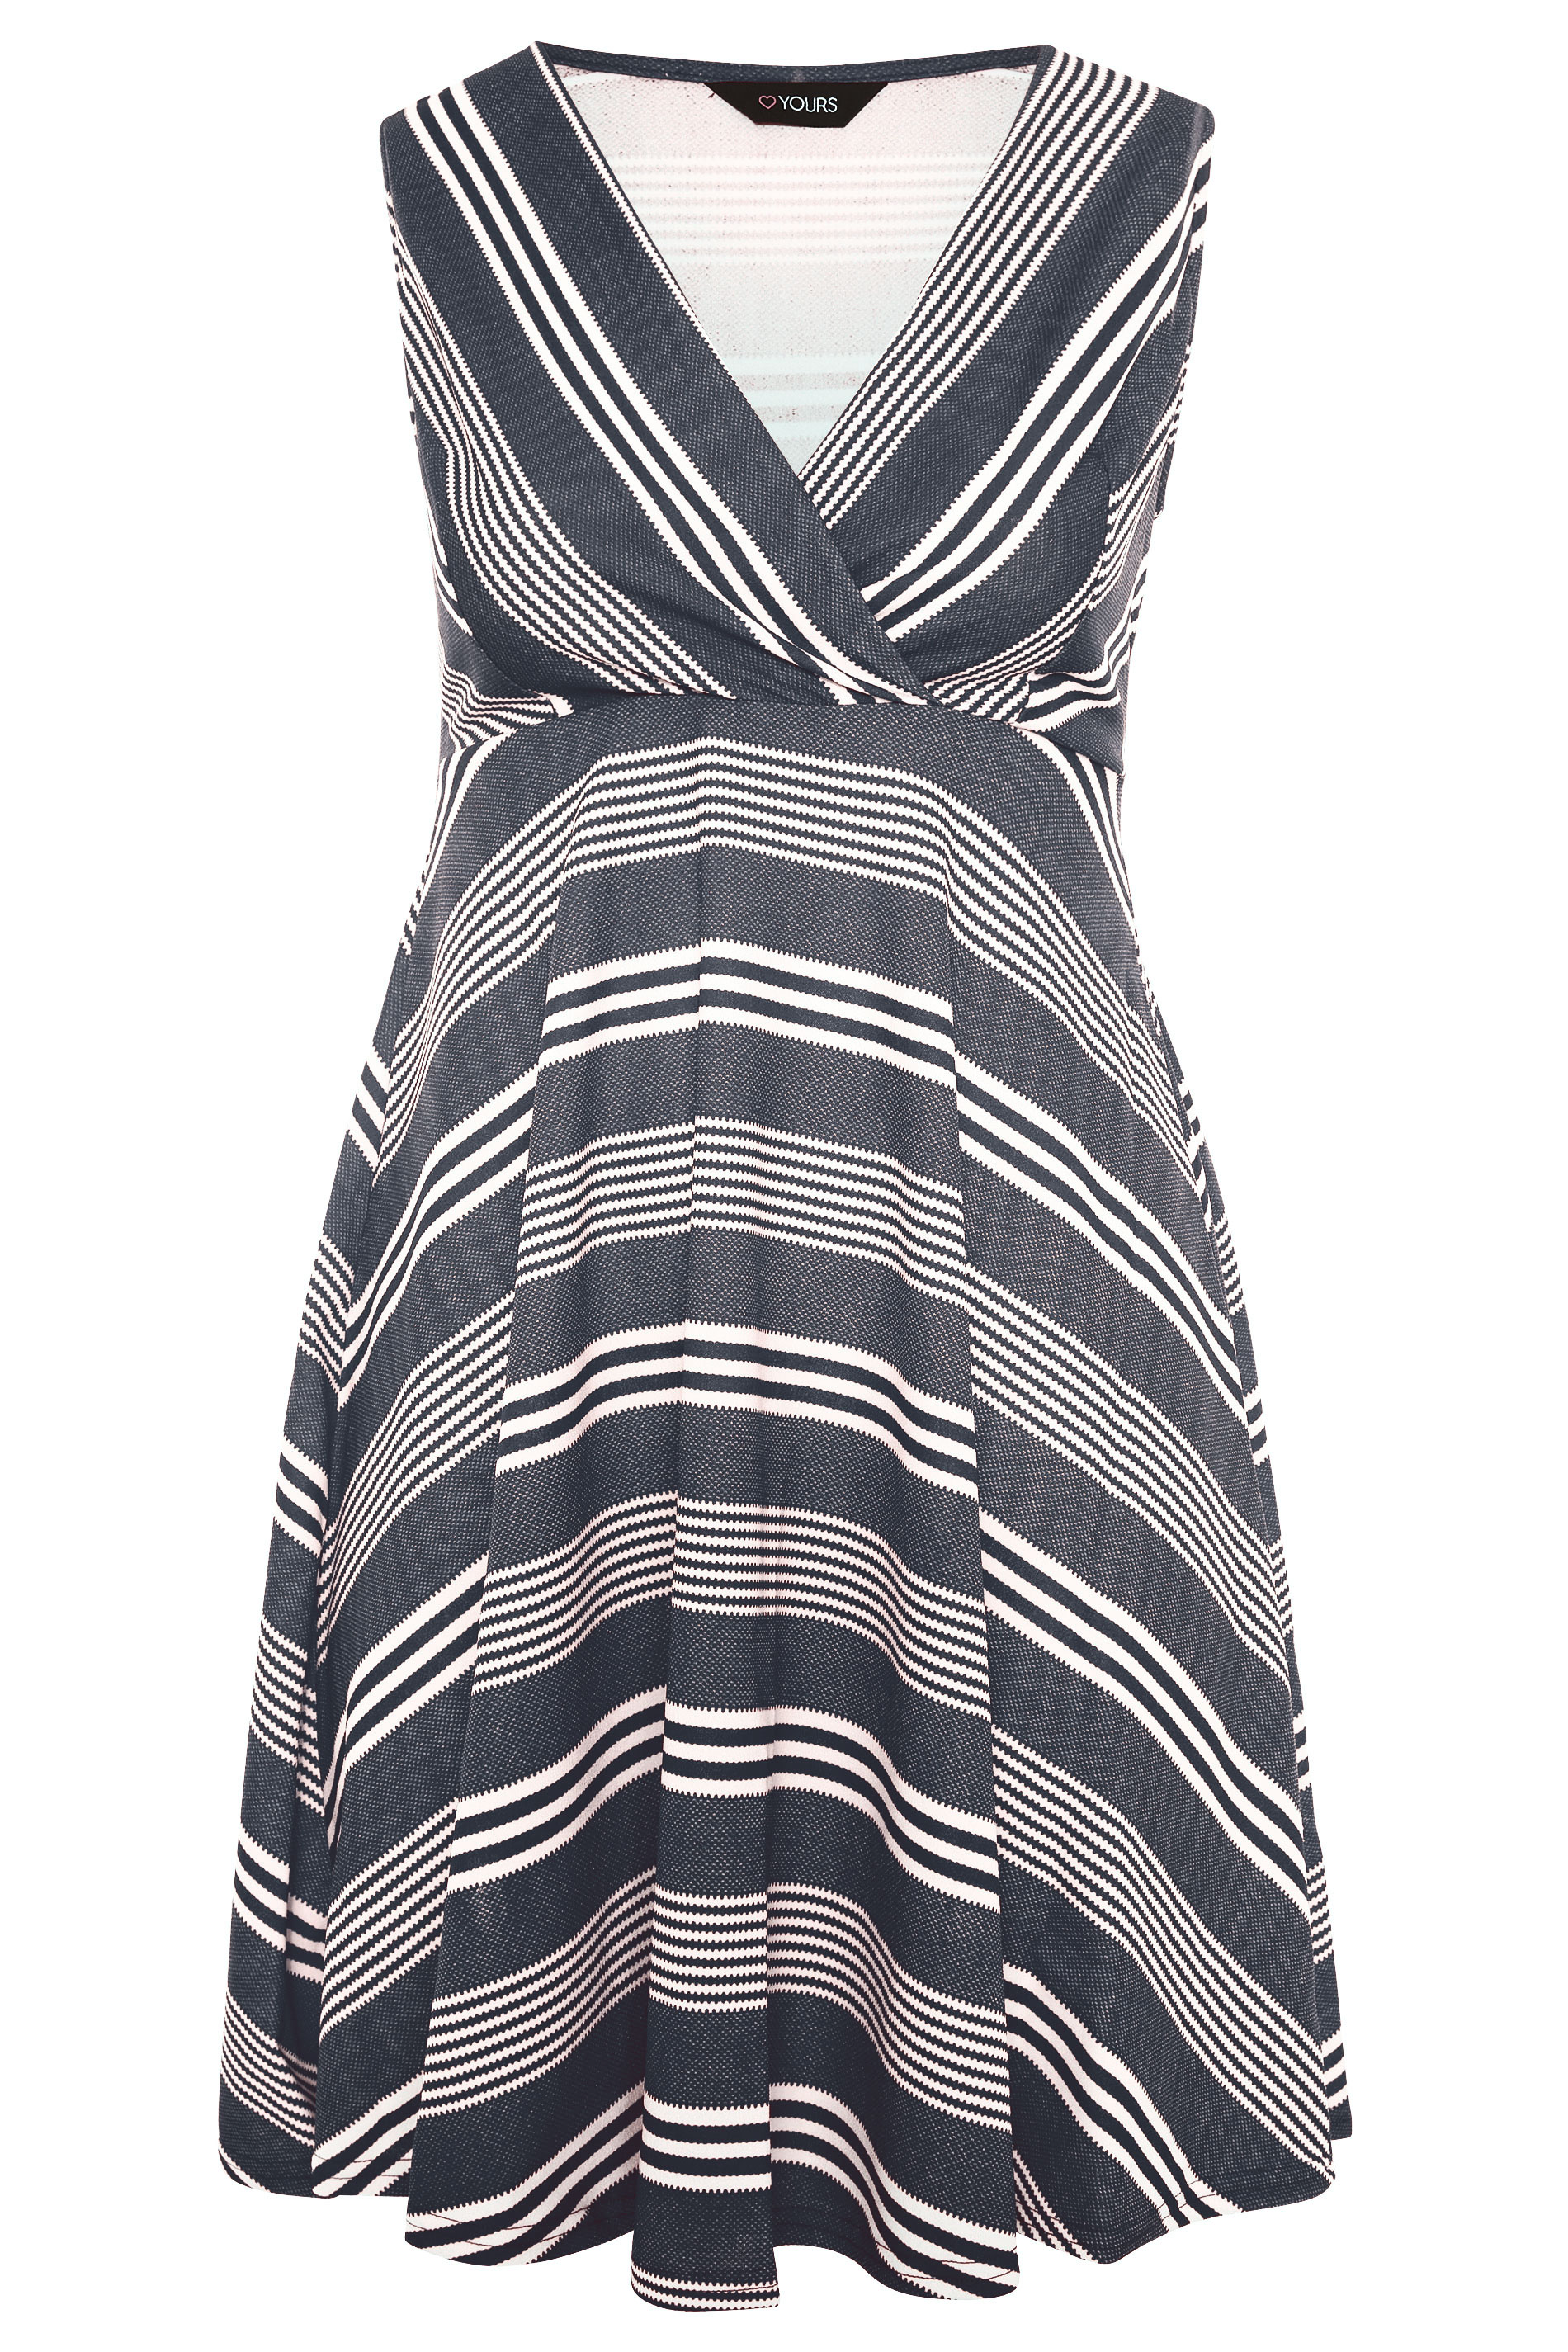 Robes Grande Taille Grande taille  Robes Patineuses | Curve Navy Blue Stripe Print Wrap Skater Dress - ZY24333